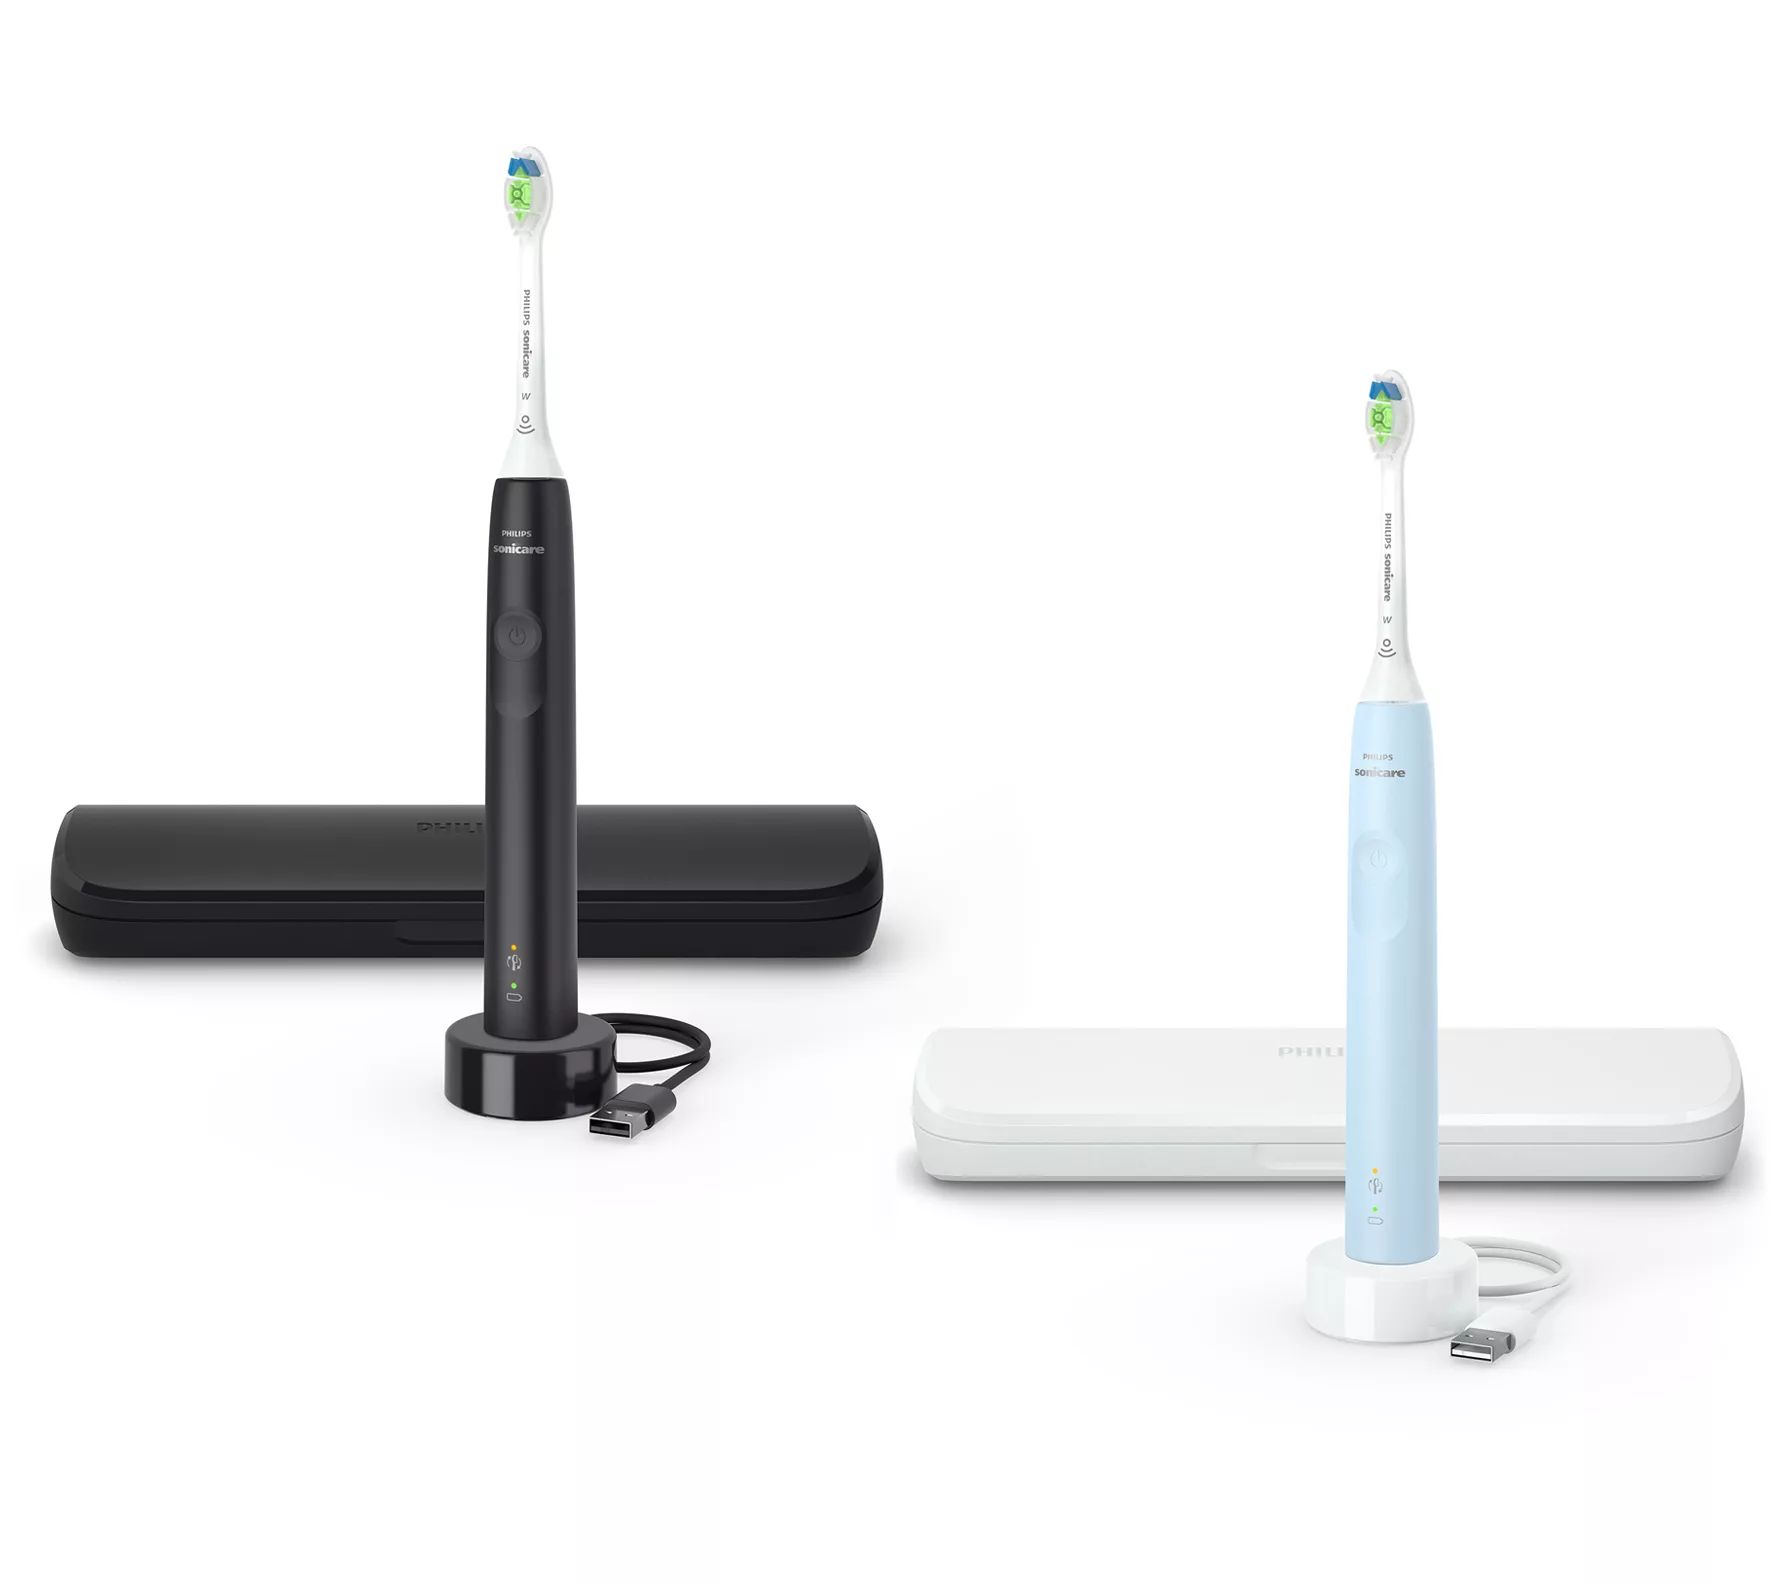 Philips Sonicare 4900 Series Set of 2 Toothbrushes - QVC.com | QVC